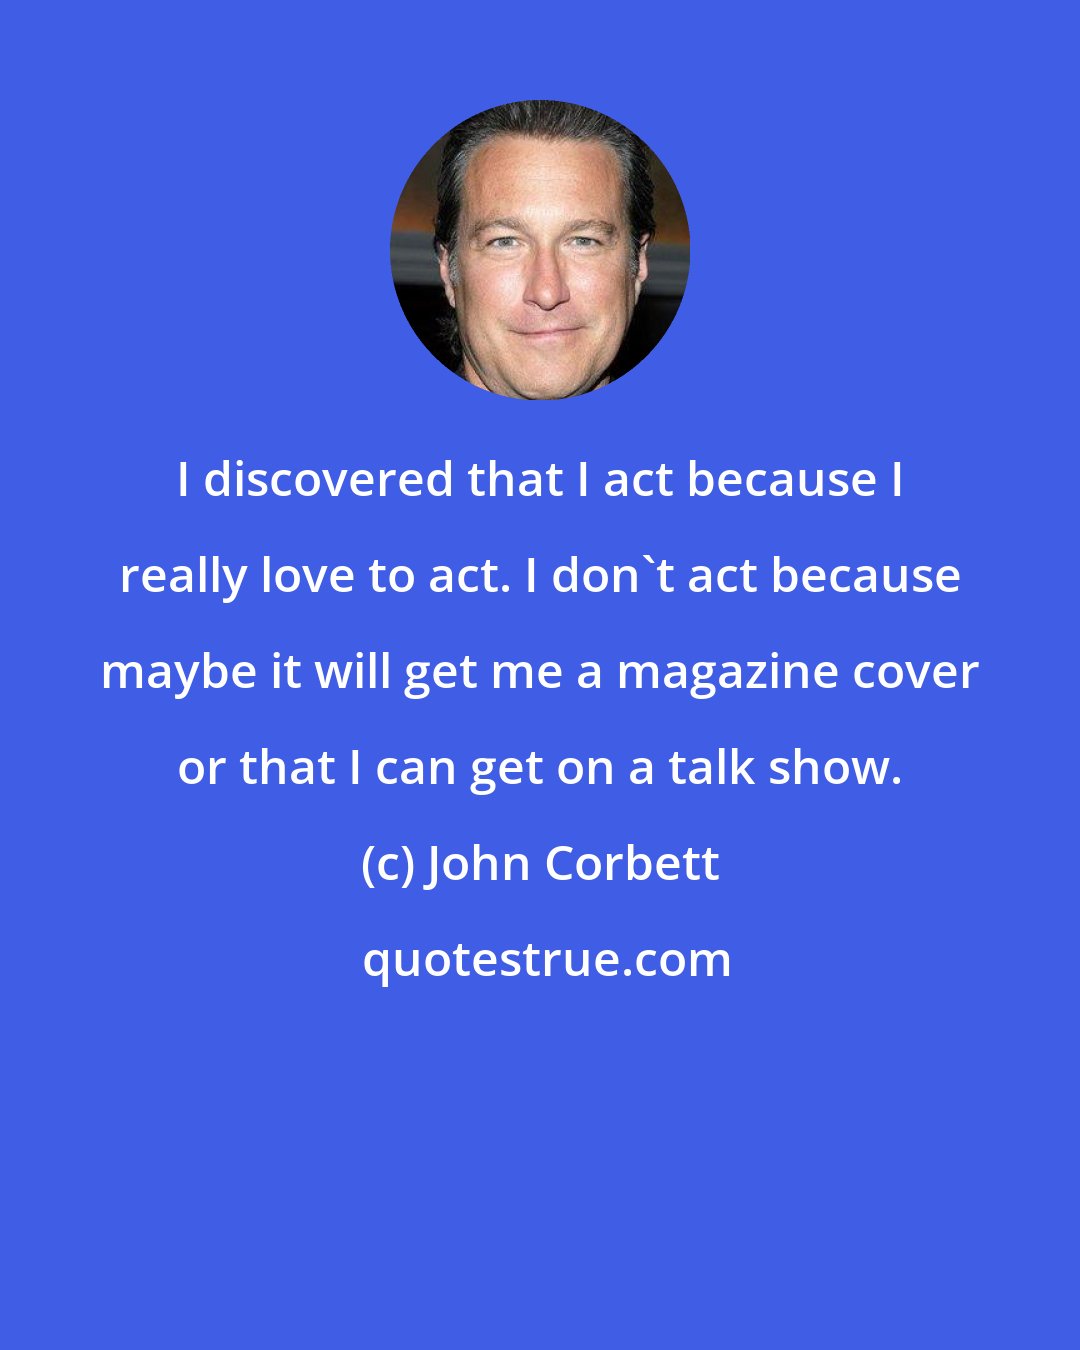 John Corbett: I discovered that I act because I really love to act. I don't act because maybe it will get me a magazine cover or that I can get on a talk show.